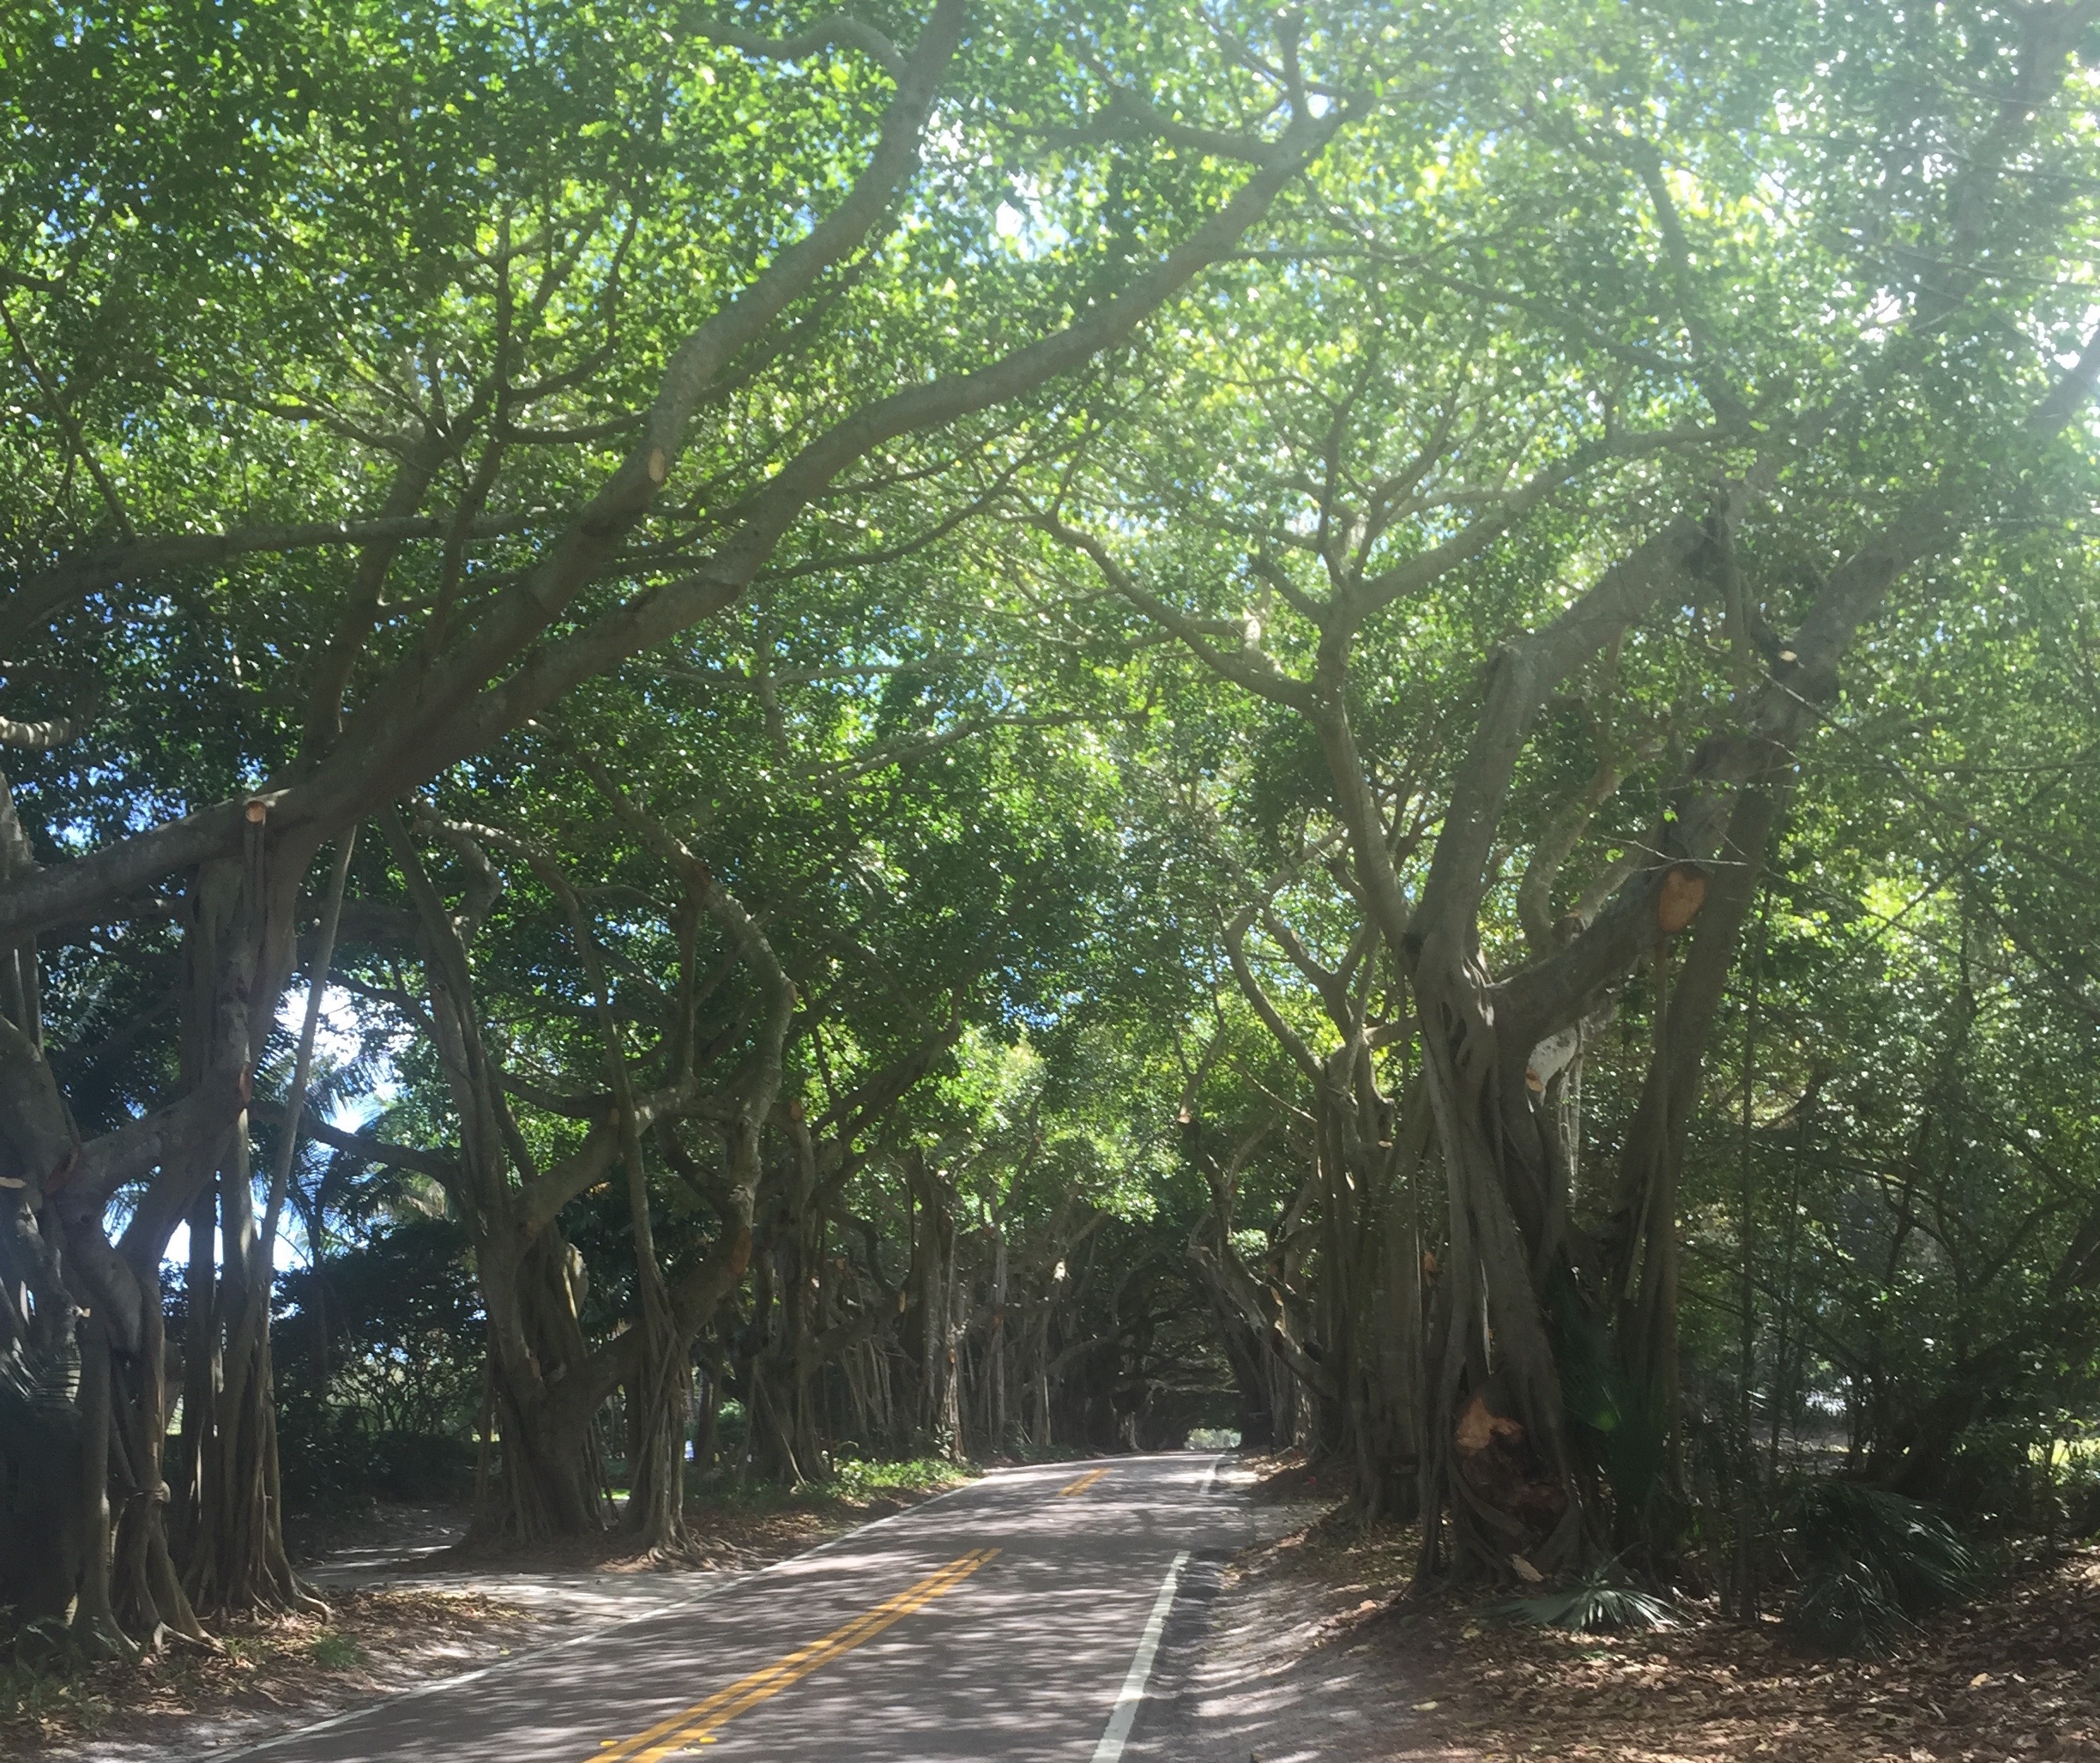 Banyan trees covering the road. 